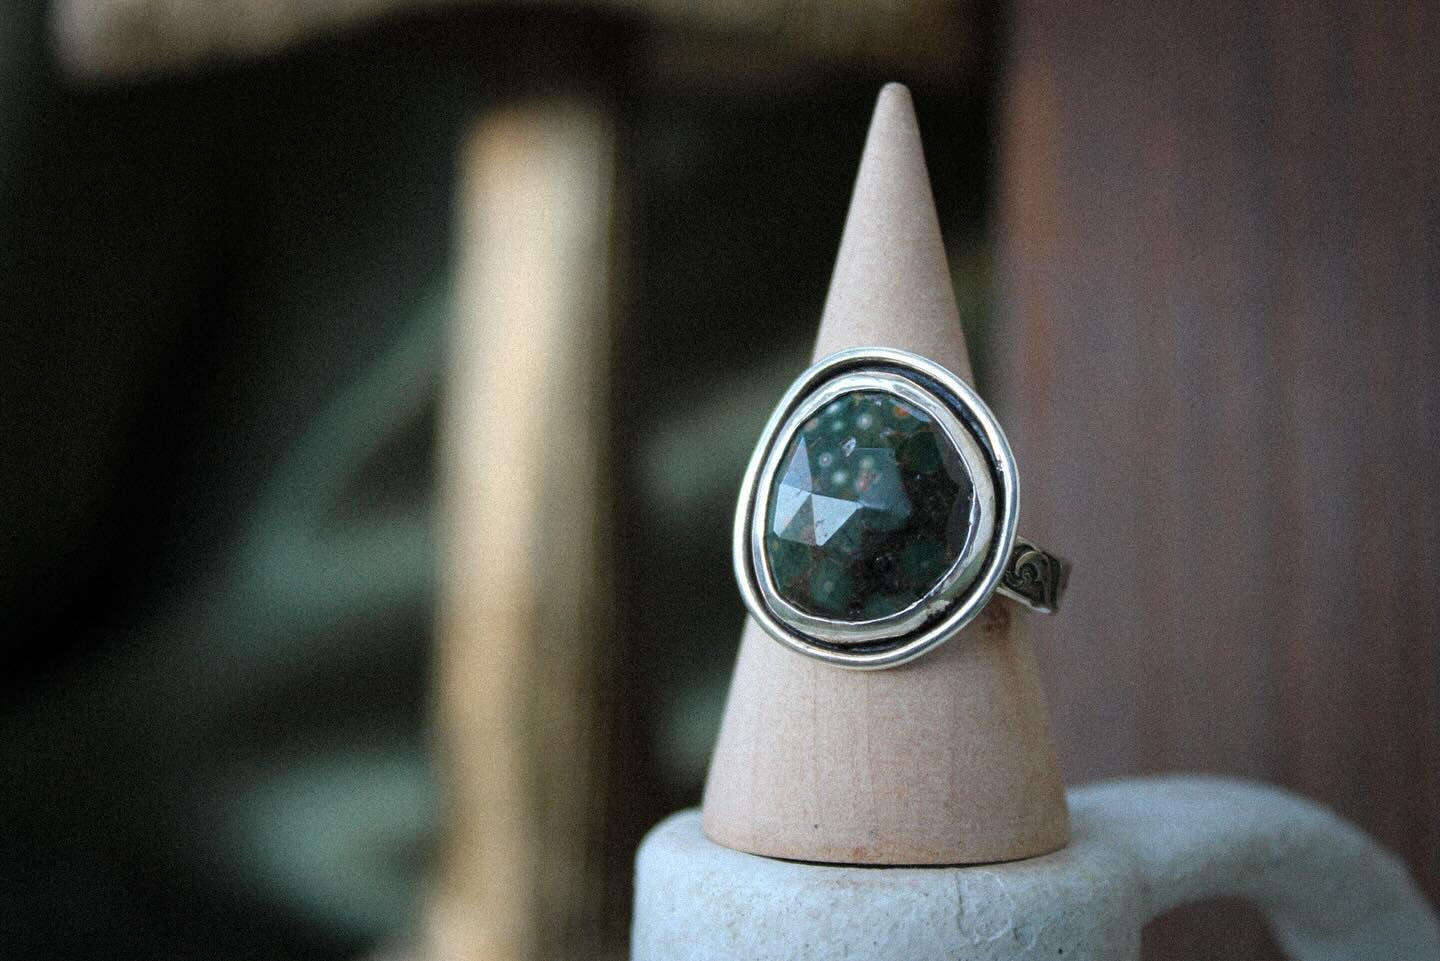 𖦹 patient waters 𖦹

this beautiful ocean jasper ring is available in the shop. it&rsquo;s one of my faves. 

fits size 7.5-7.75

#oceanjasper #jasper #rings #newmoon #silversmith #handmade #bohojewelry #art #entrepreneur #ring #artisan #jasperrings